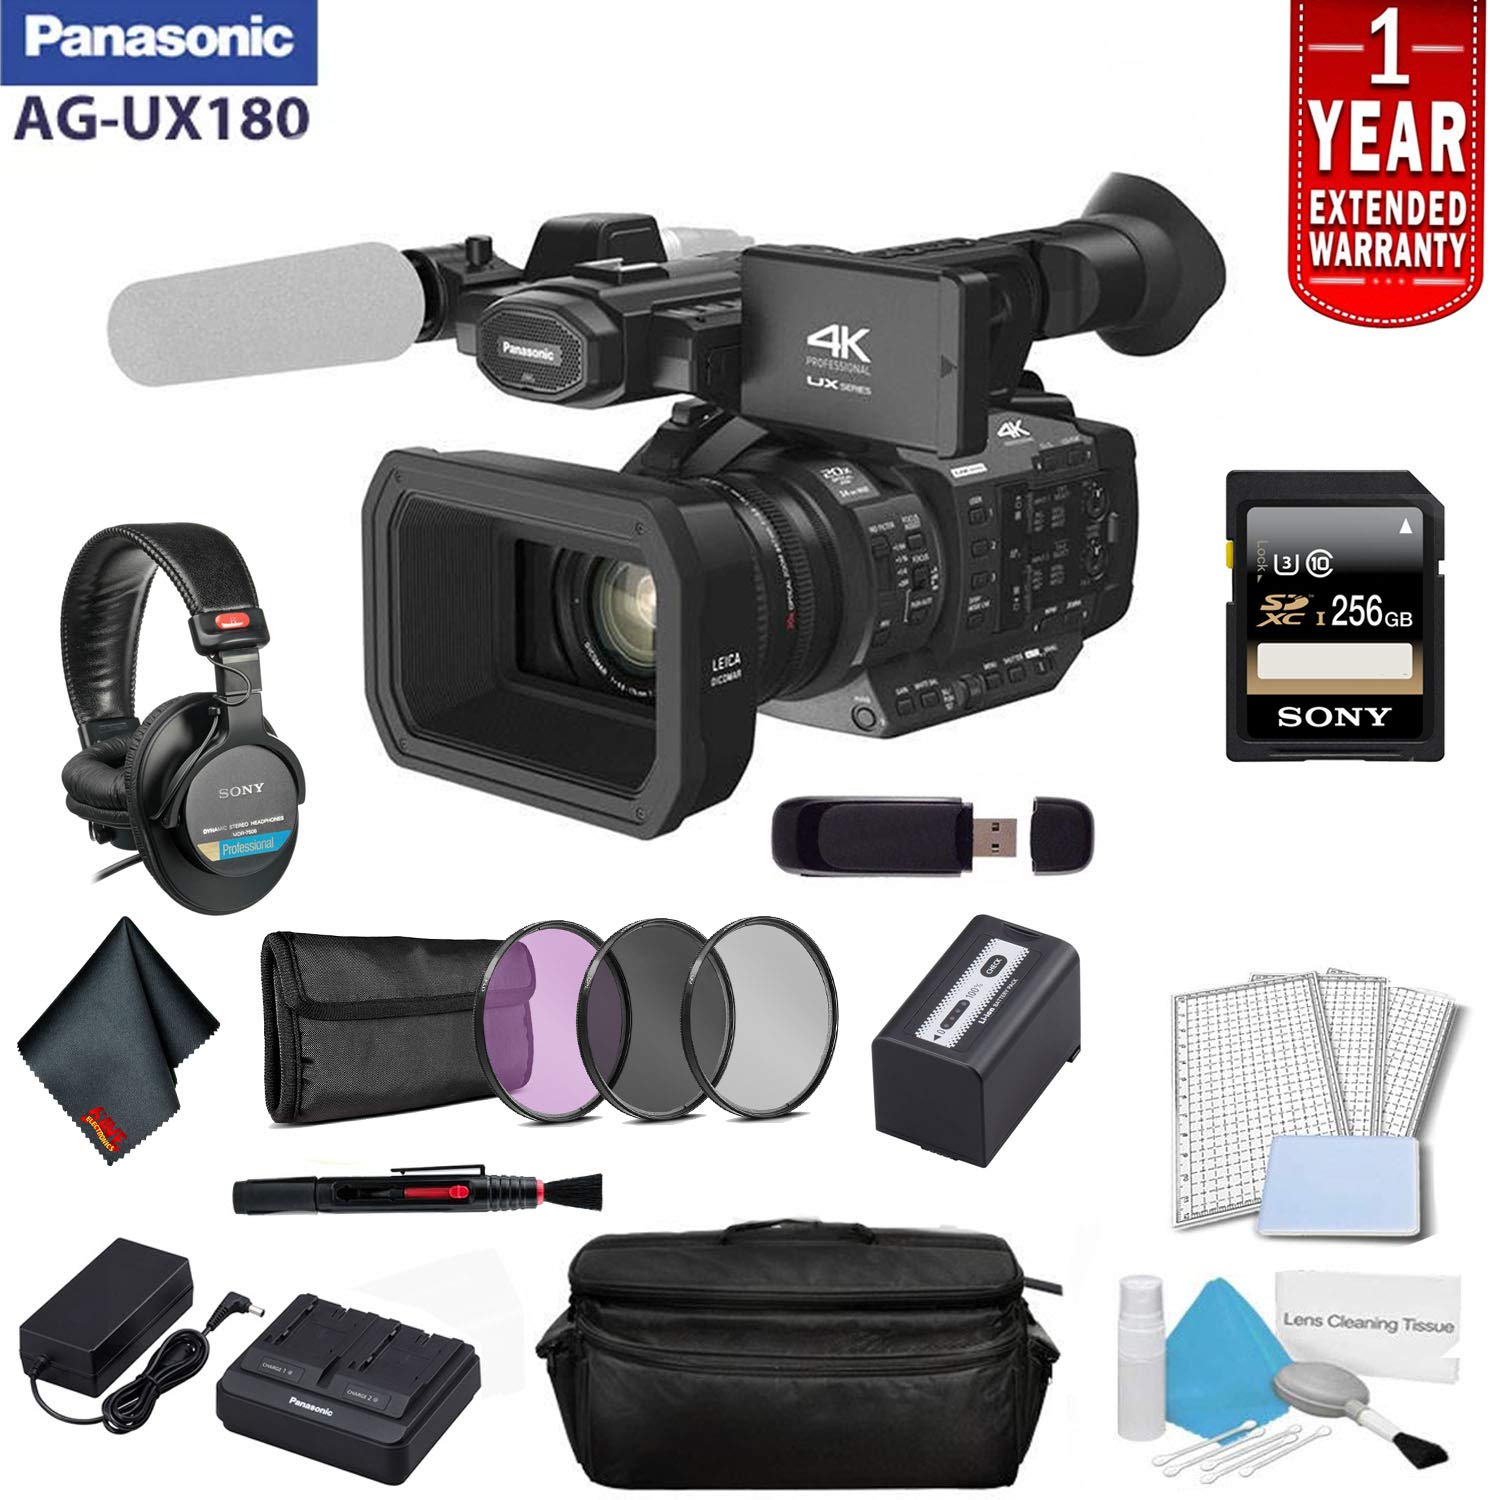 Panasonic AG-UX180 4K Premium Professional Camcorder Bundle with 1 Year Extended Warranty, Sony MDR-7506 Headphones + So